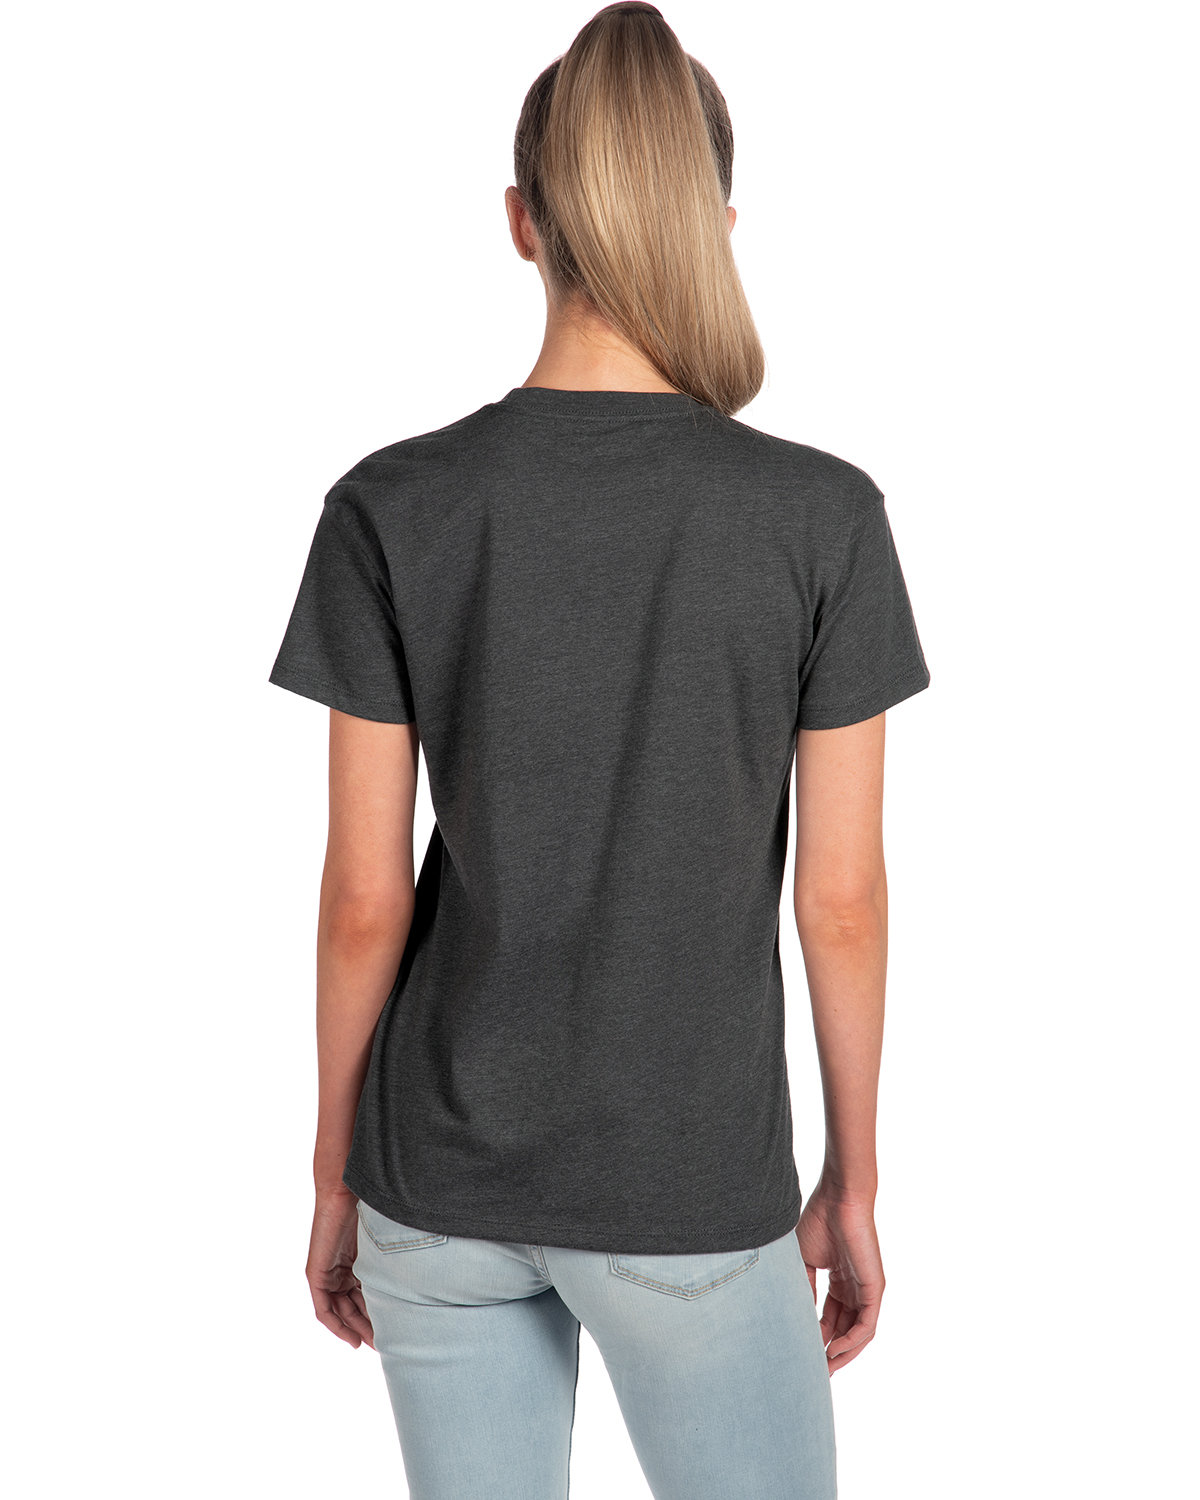 Next Level Apparel Ladies' Relaxed CVC T-Shirt | alphabroder Canada